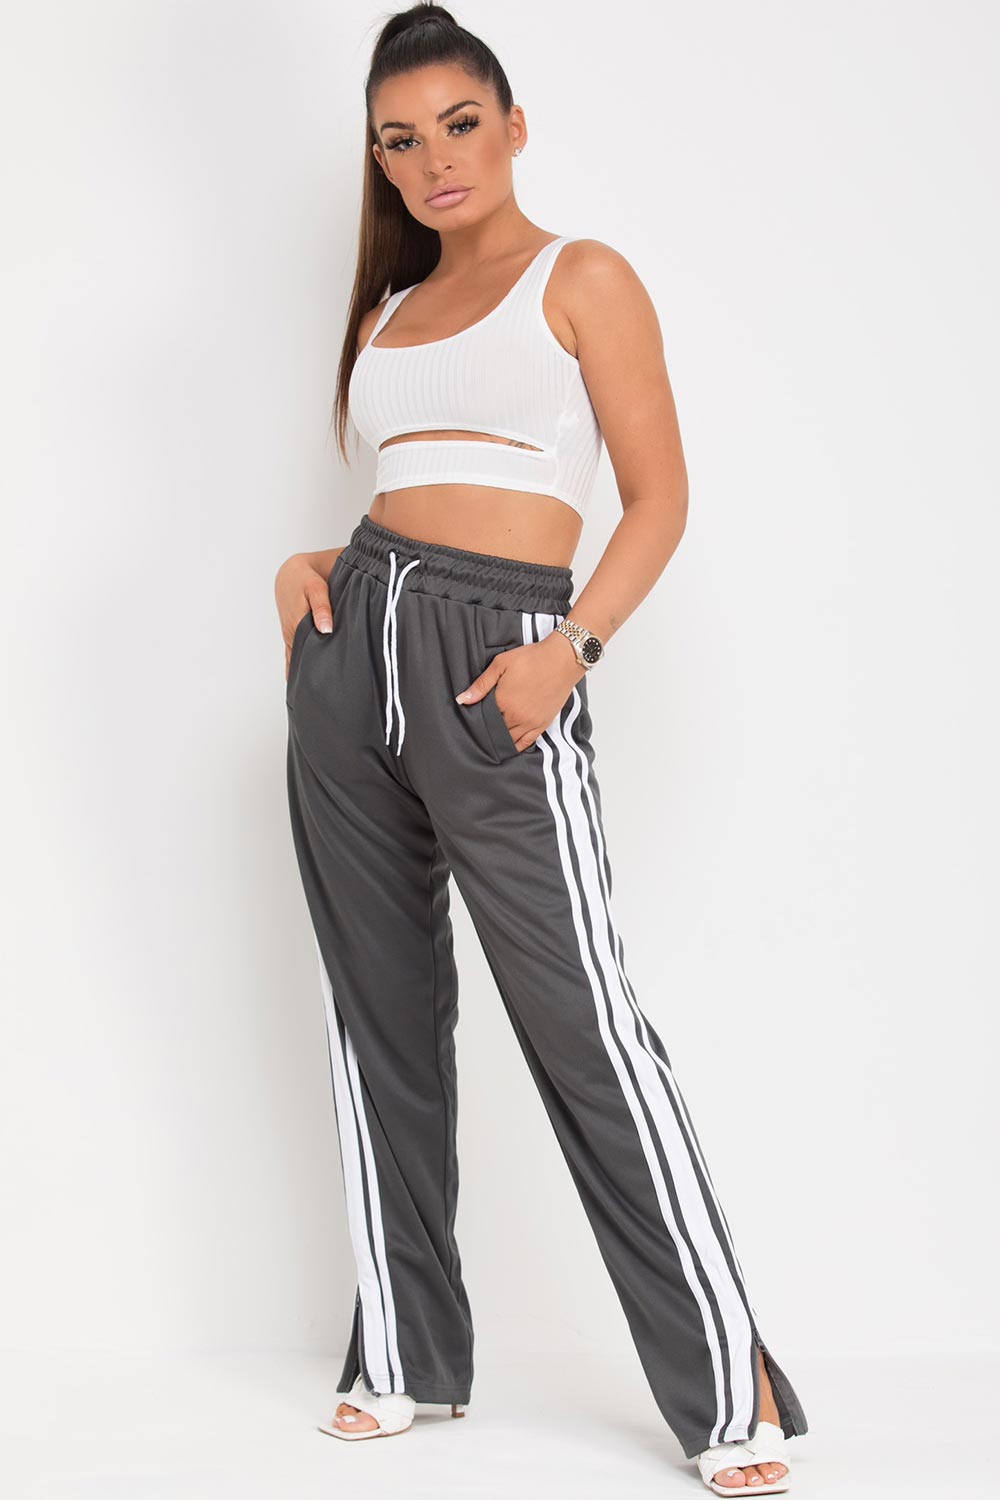 Crop Top + Striped Wide Leg Striped Pants — bows & sequins  Striped wide  leg pants, Stripe pants outfit, Crop top outfits